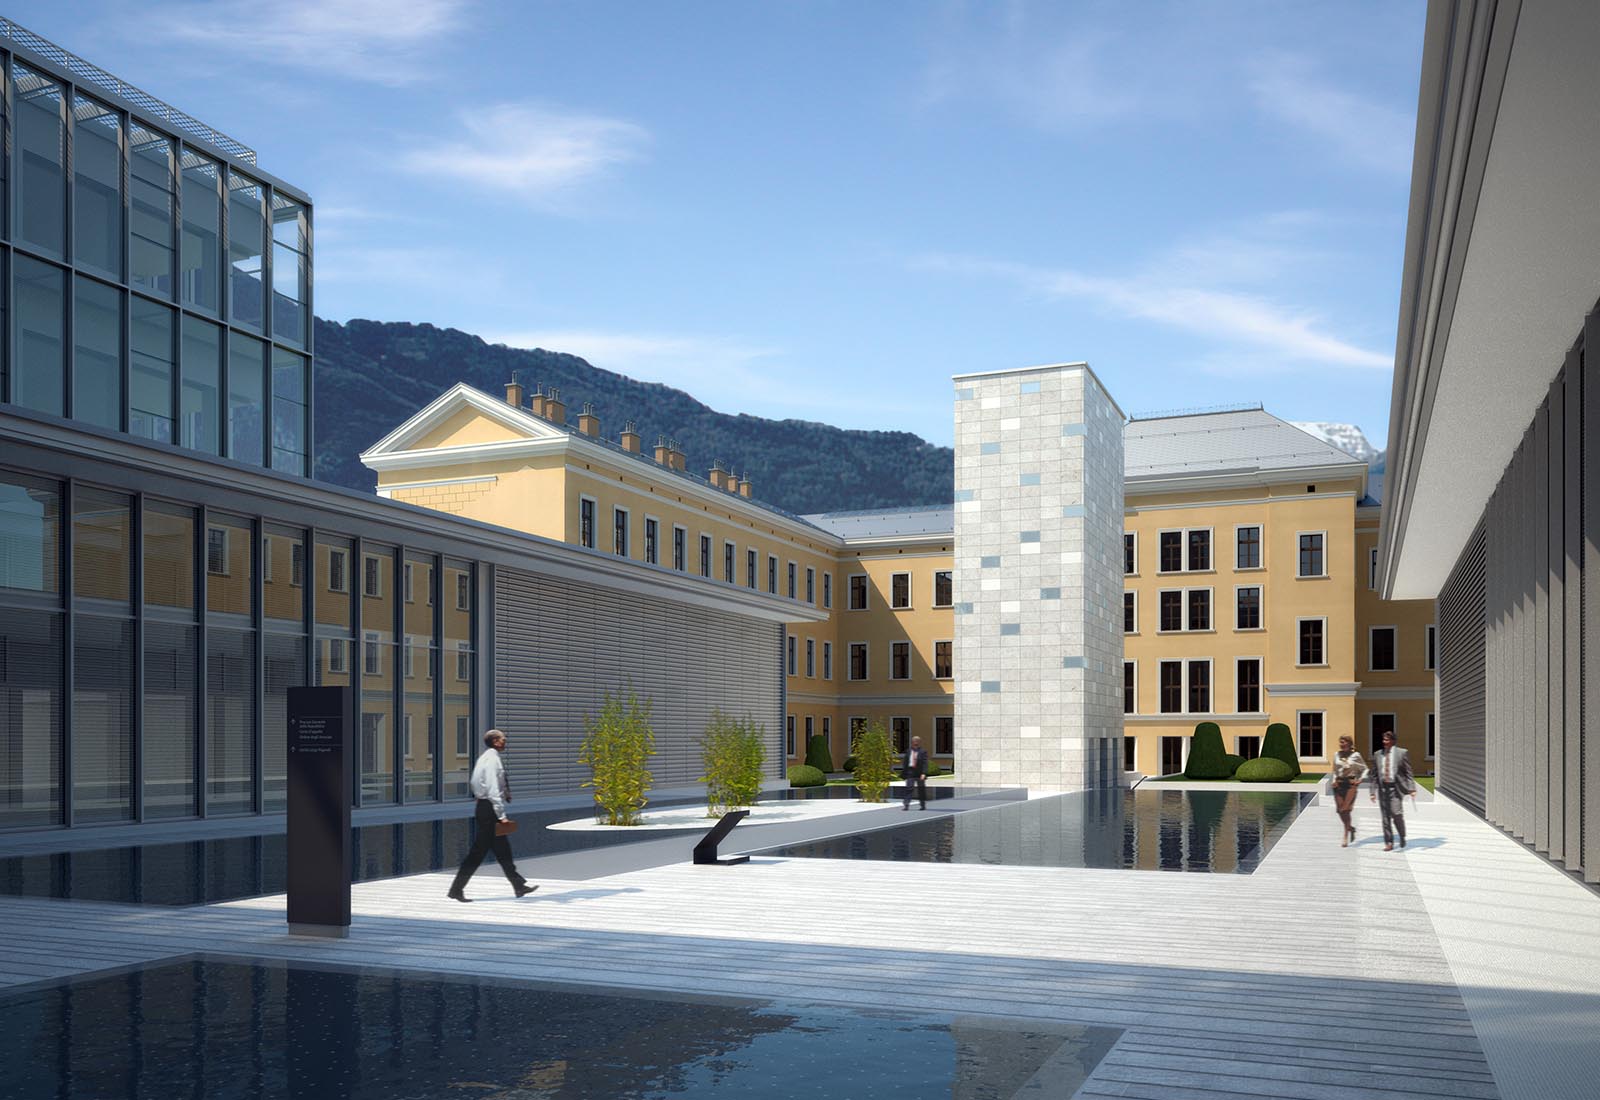 New courthouse in Trento - View of the courtyard west side